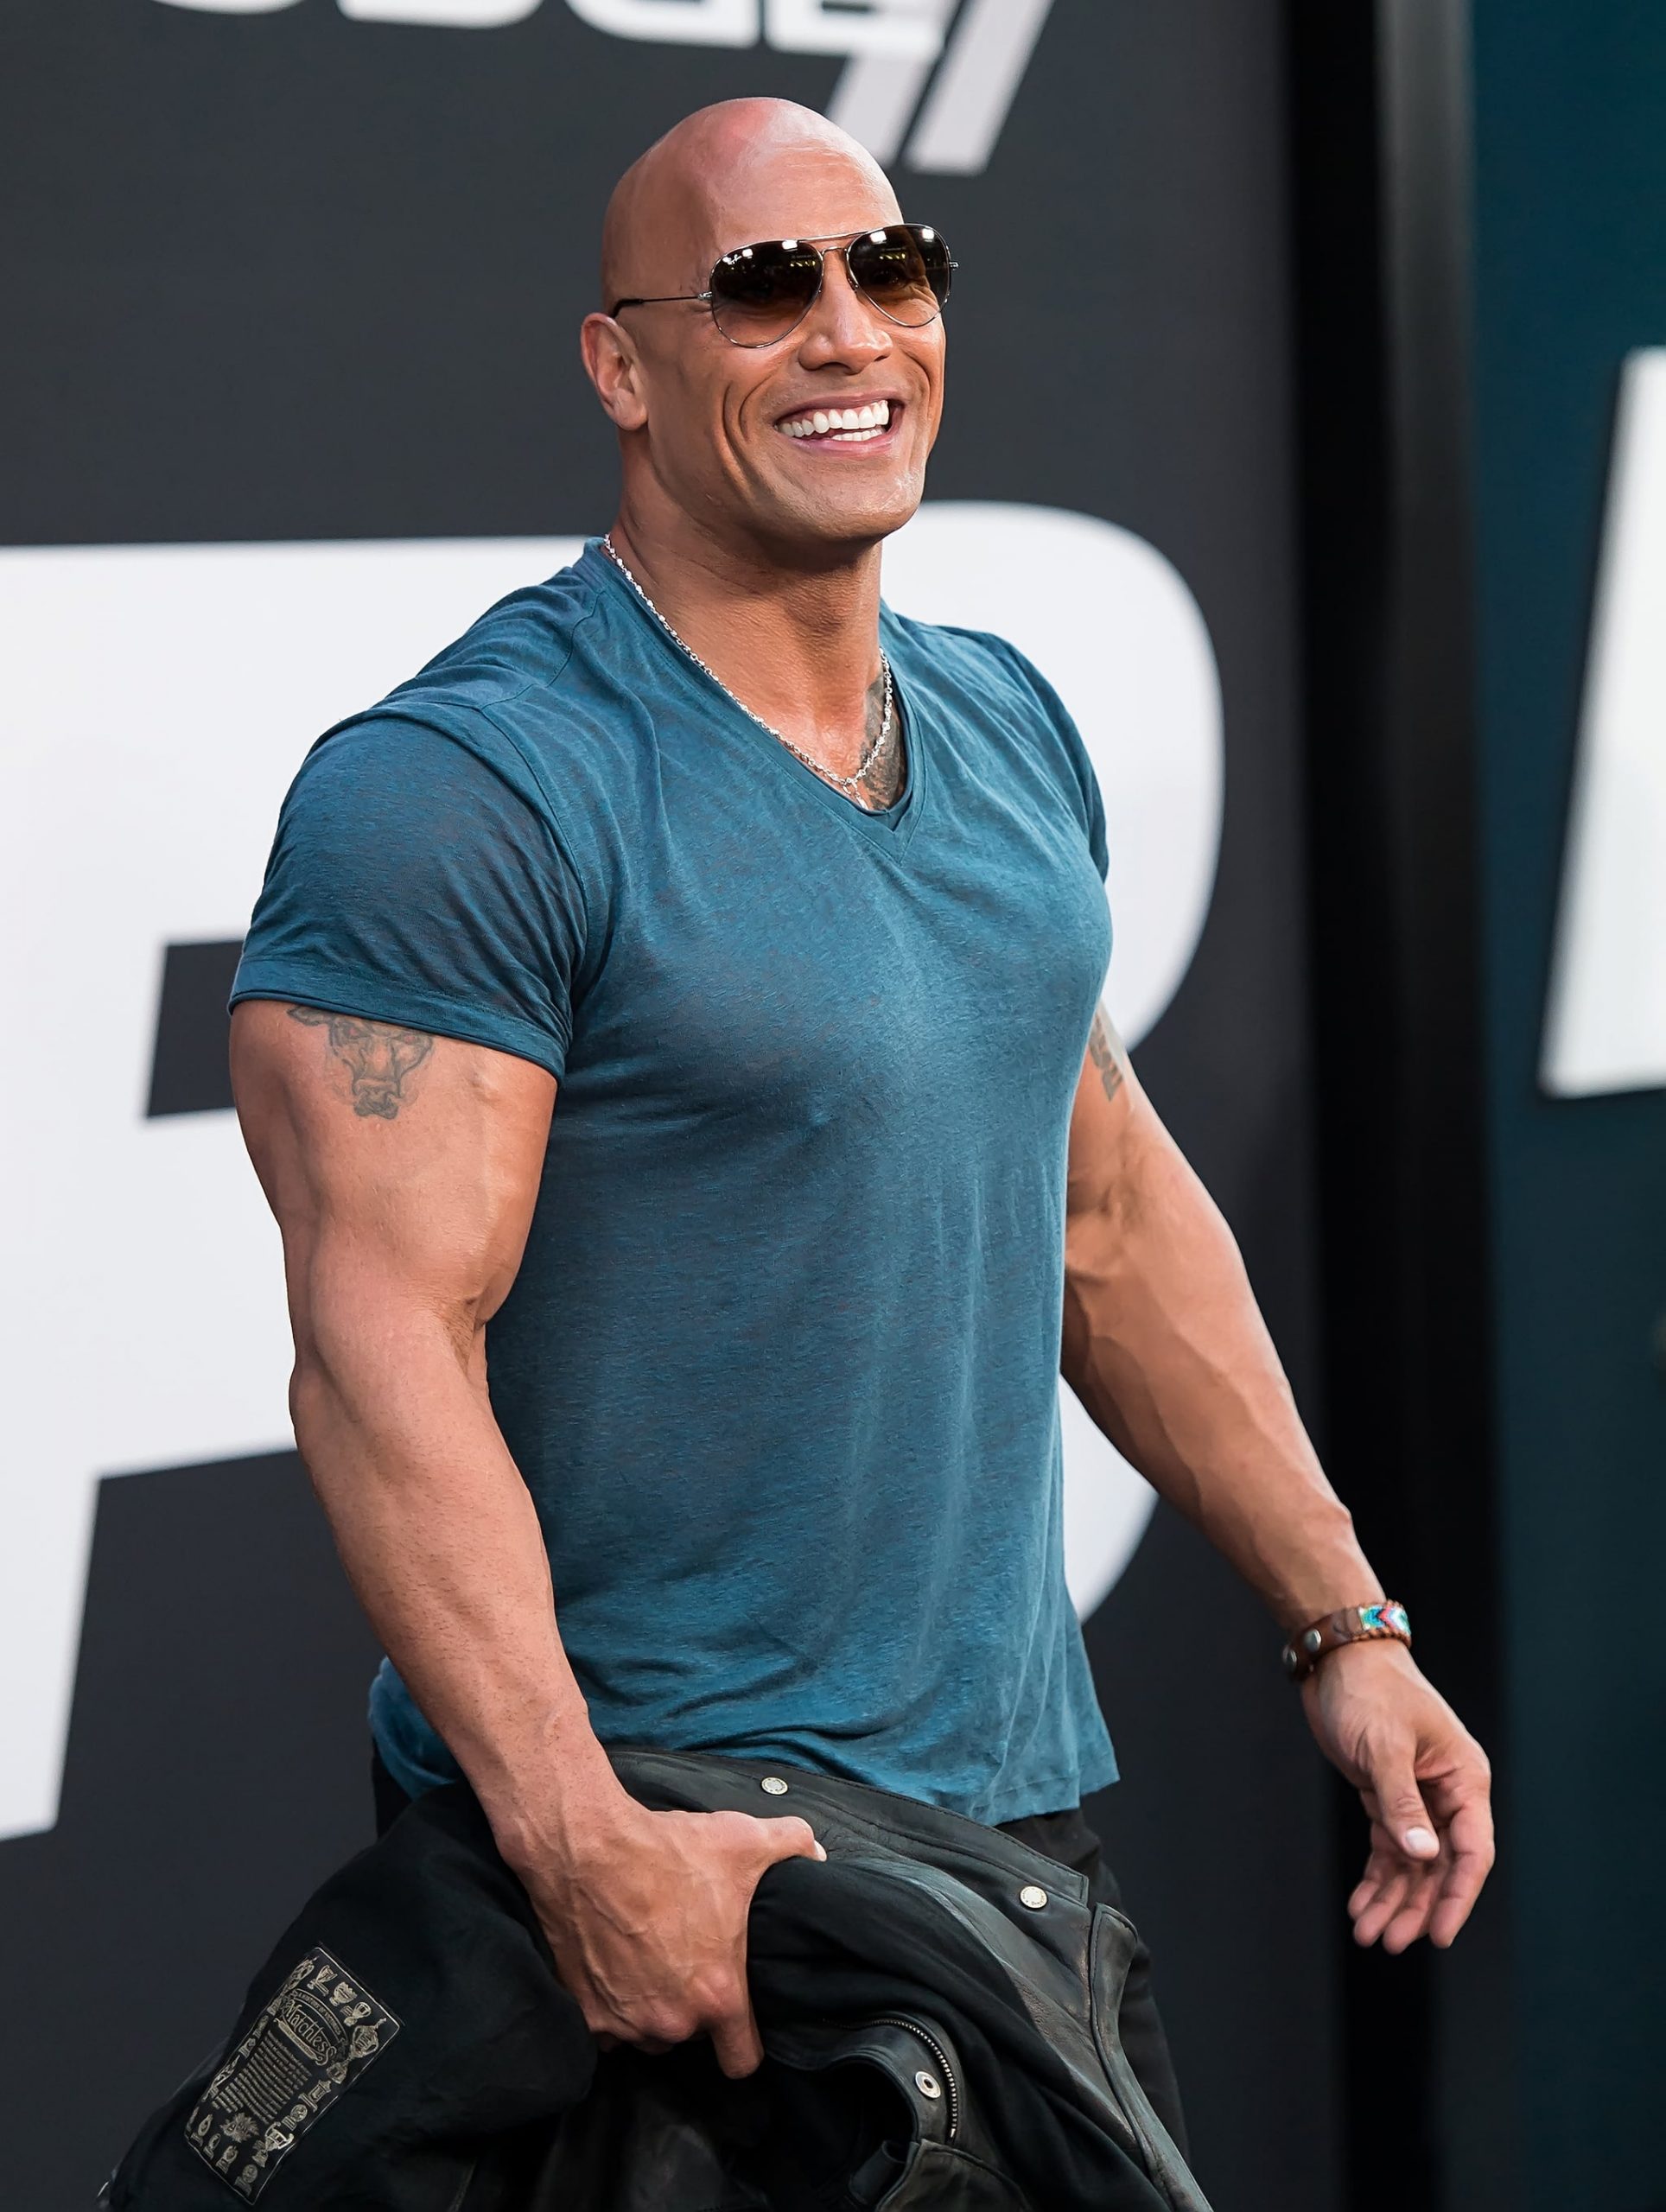 Dwayne Johnson - Age, Height, Weight, Net Worth, Wife